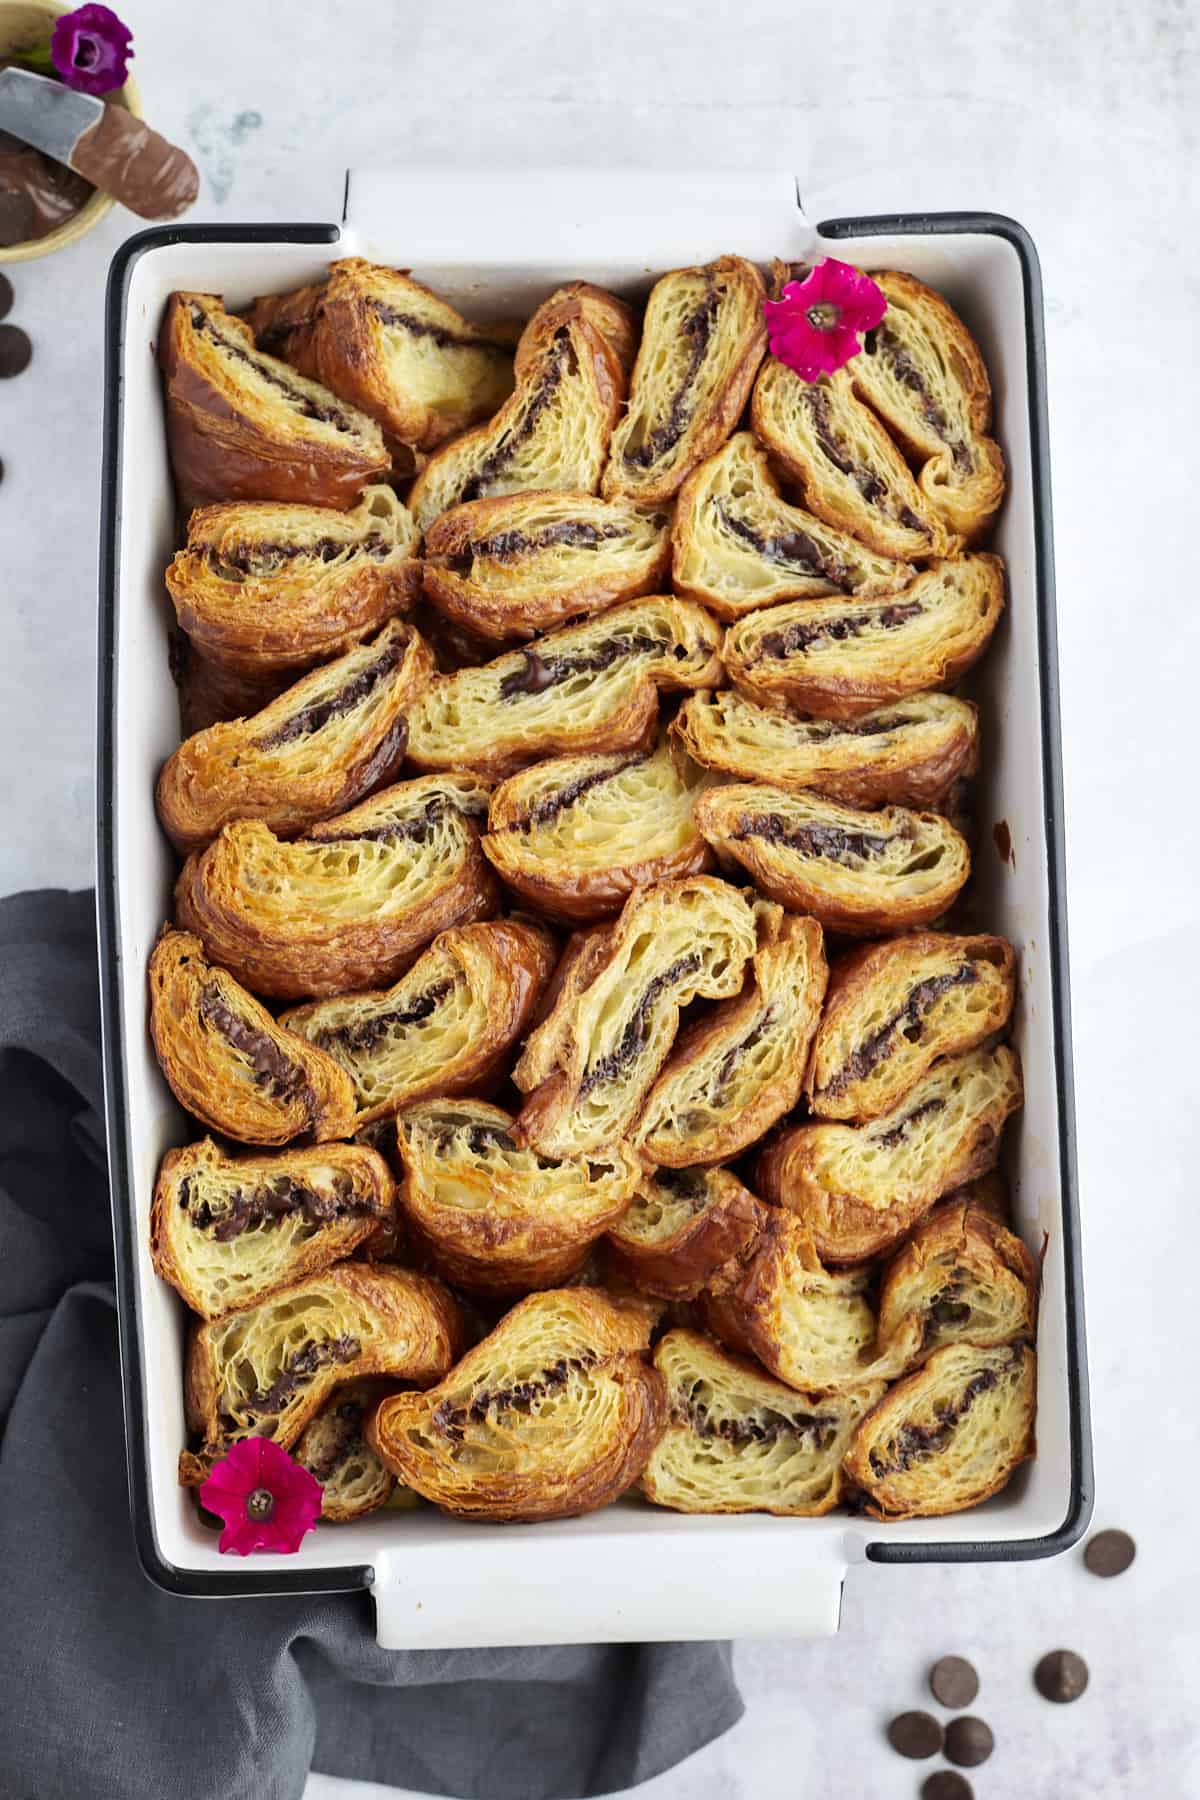 a baking pan full of baked Nutella stuffed croissant french toast